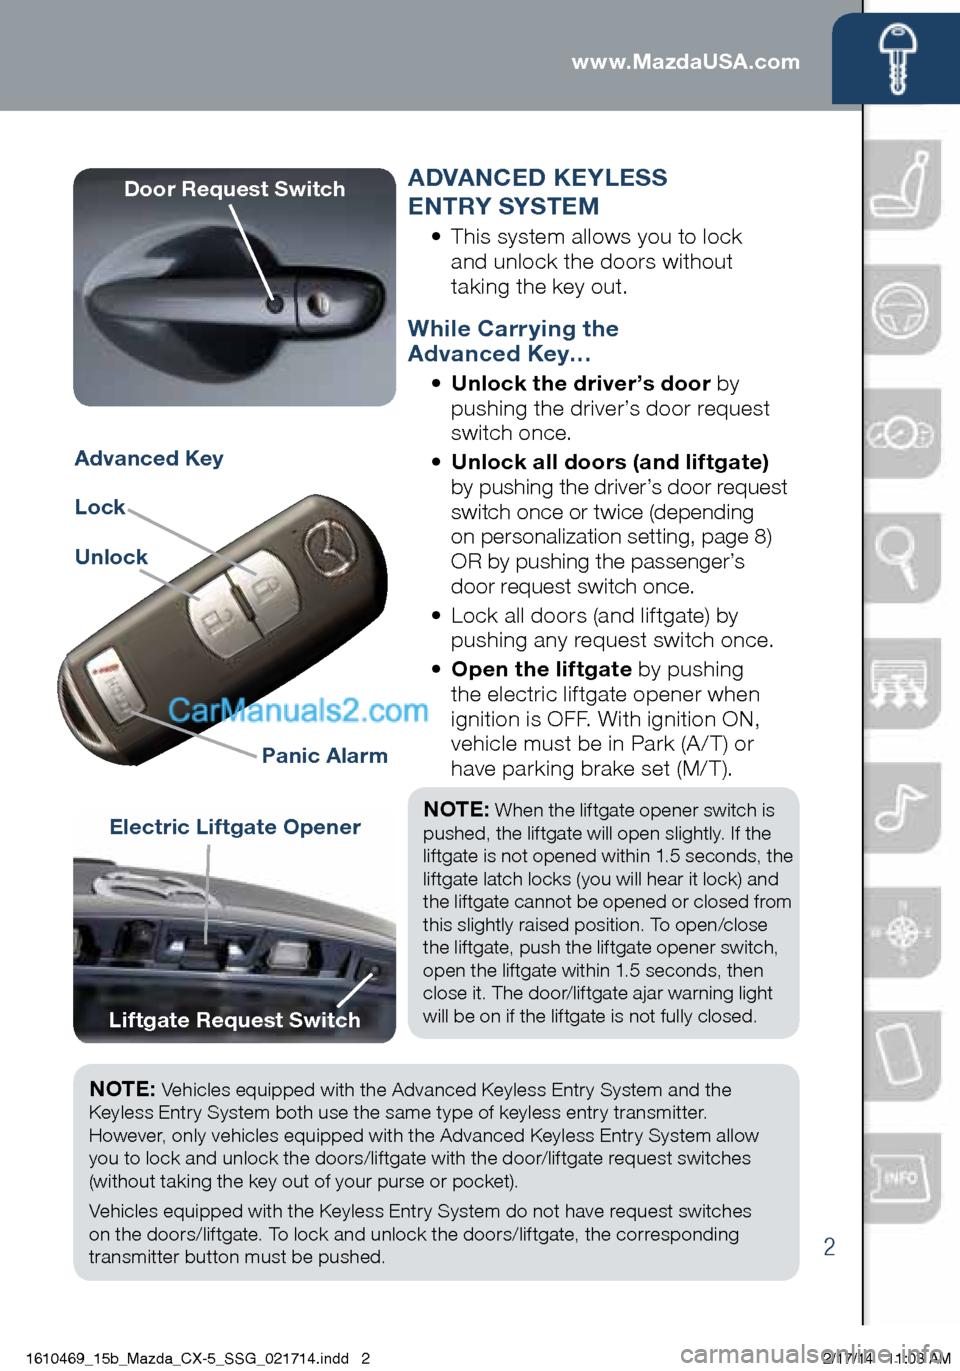 MAZDA MODEL CX-5 2015  Smart Start Guide (in English) www.MazdaUSA.com
2
Electric Liftgate Opener
Advanced Key
Lock
UnlockPanic Alarm
ADVANCED KEYLESS   
ENTRY SYSTEM
•    This system allows you to lock   
and unlock the doors without 
taking the key o